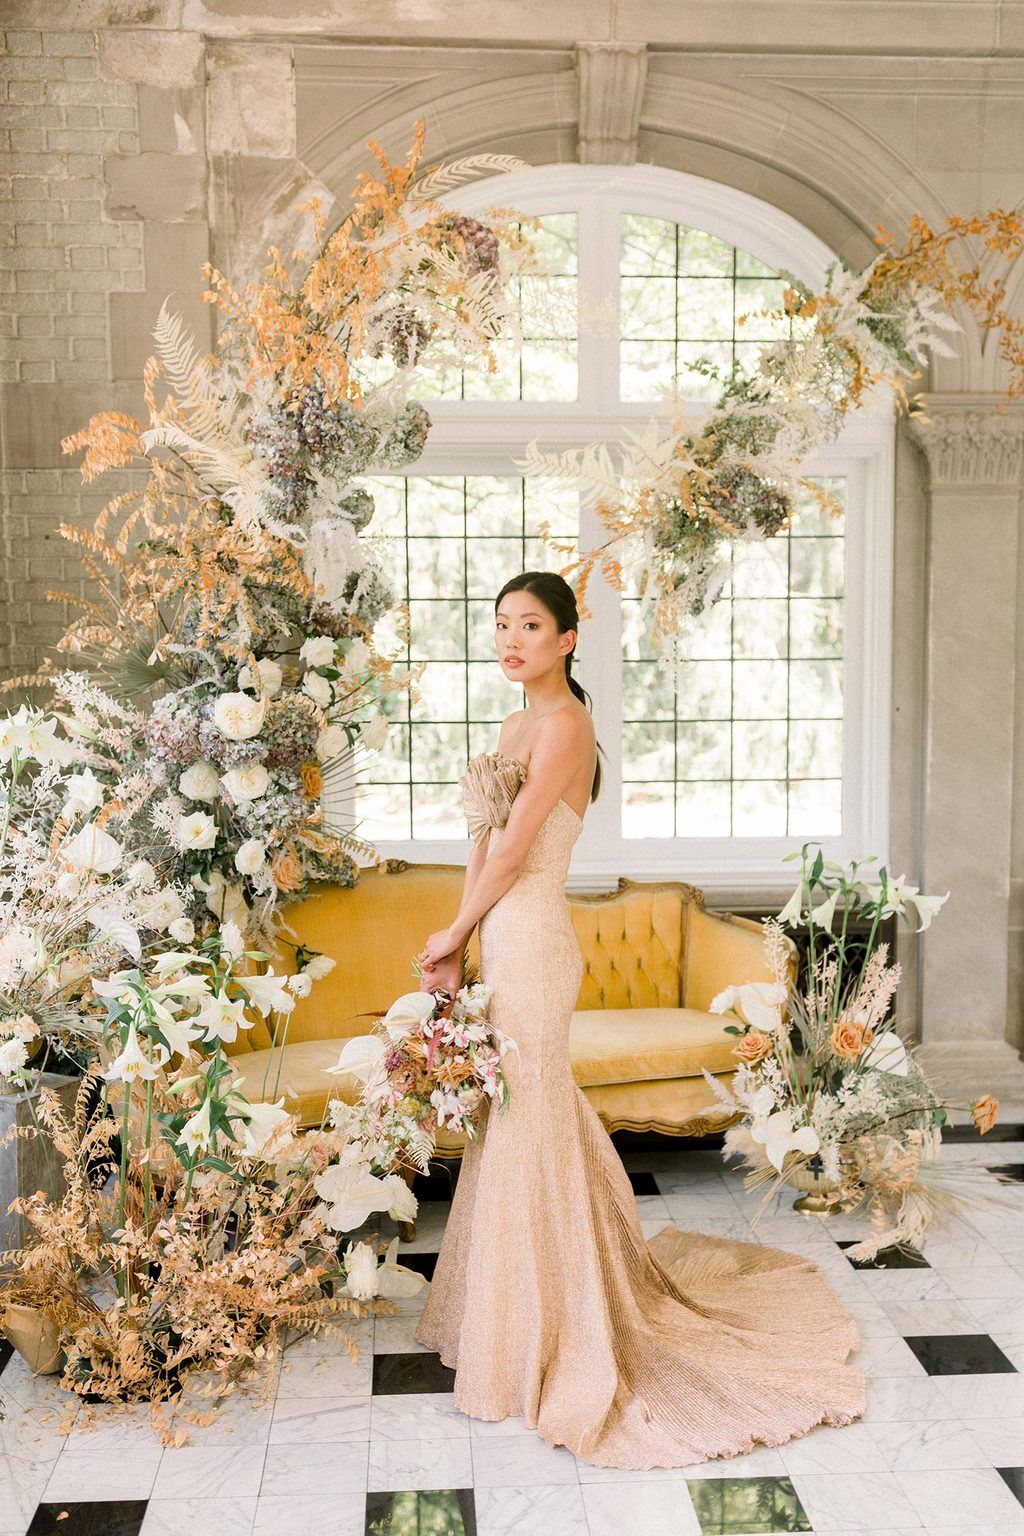 gold ruffled wedding dress with a vintage velvet sofa and wild, wispy floral installation